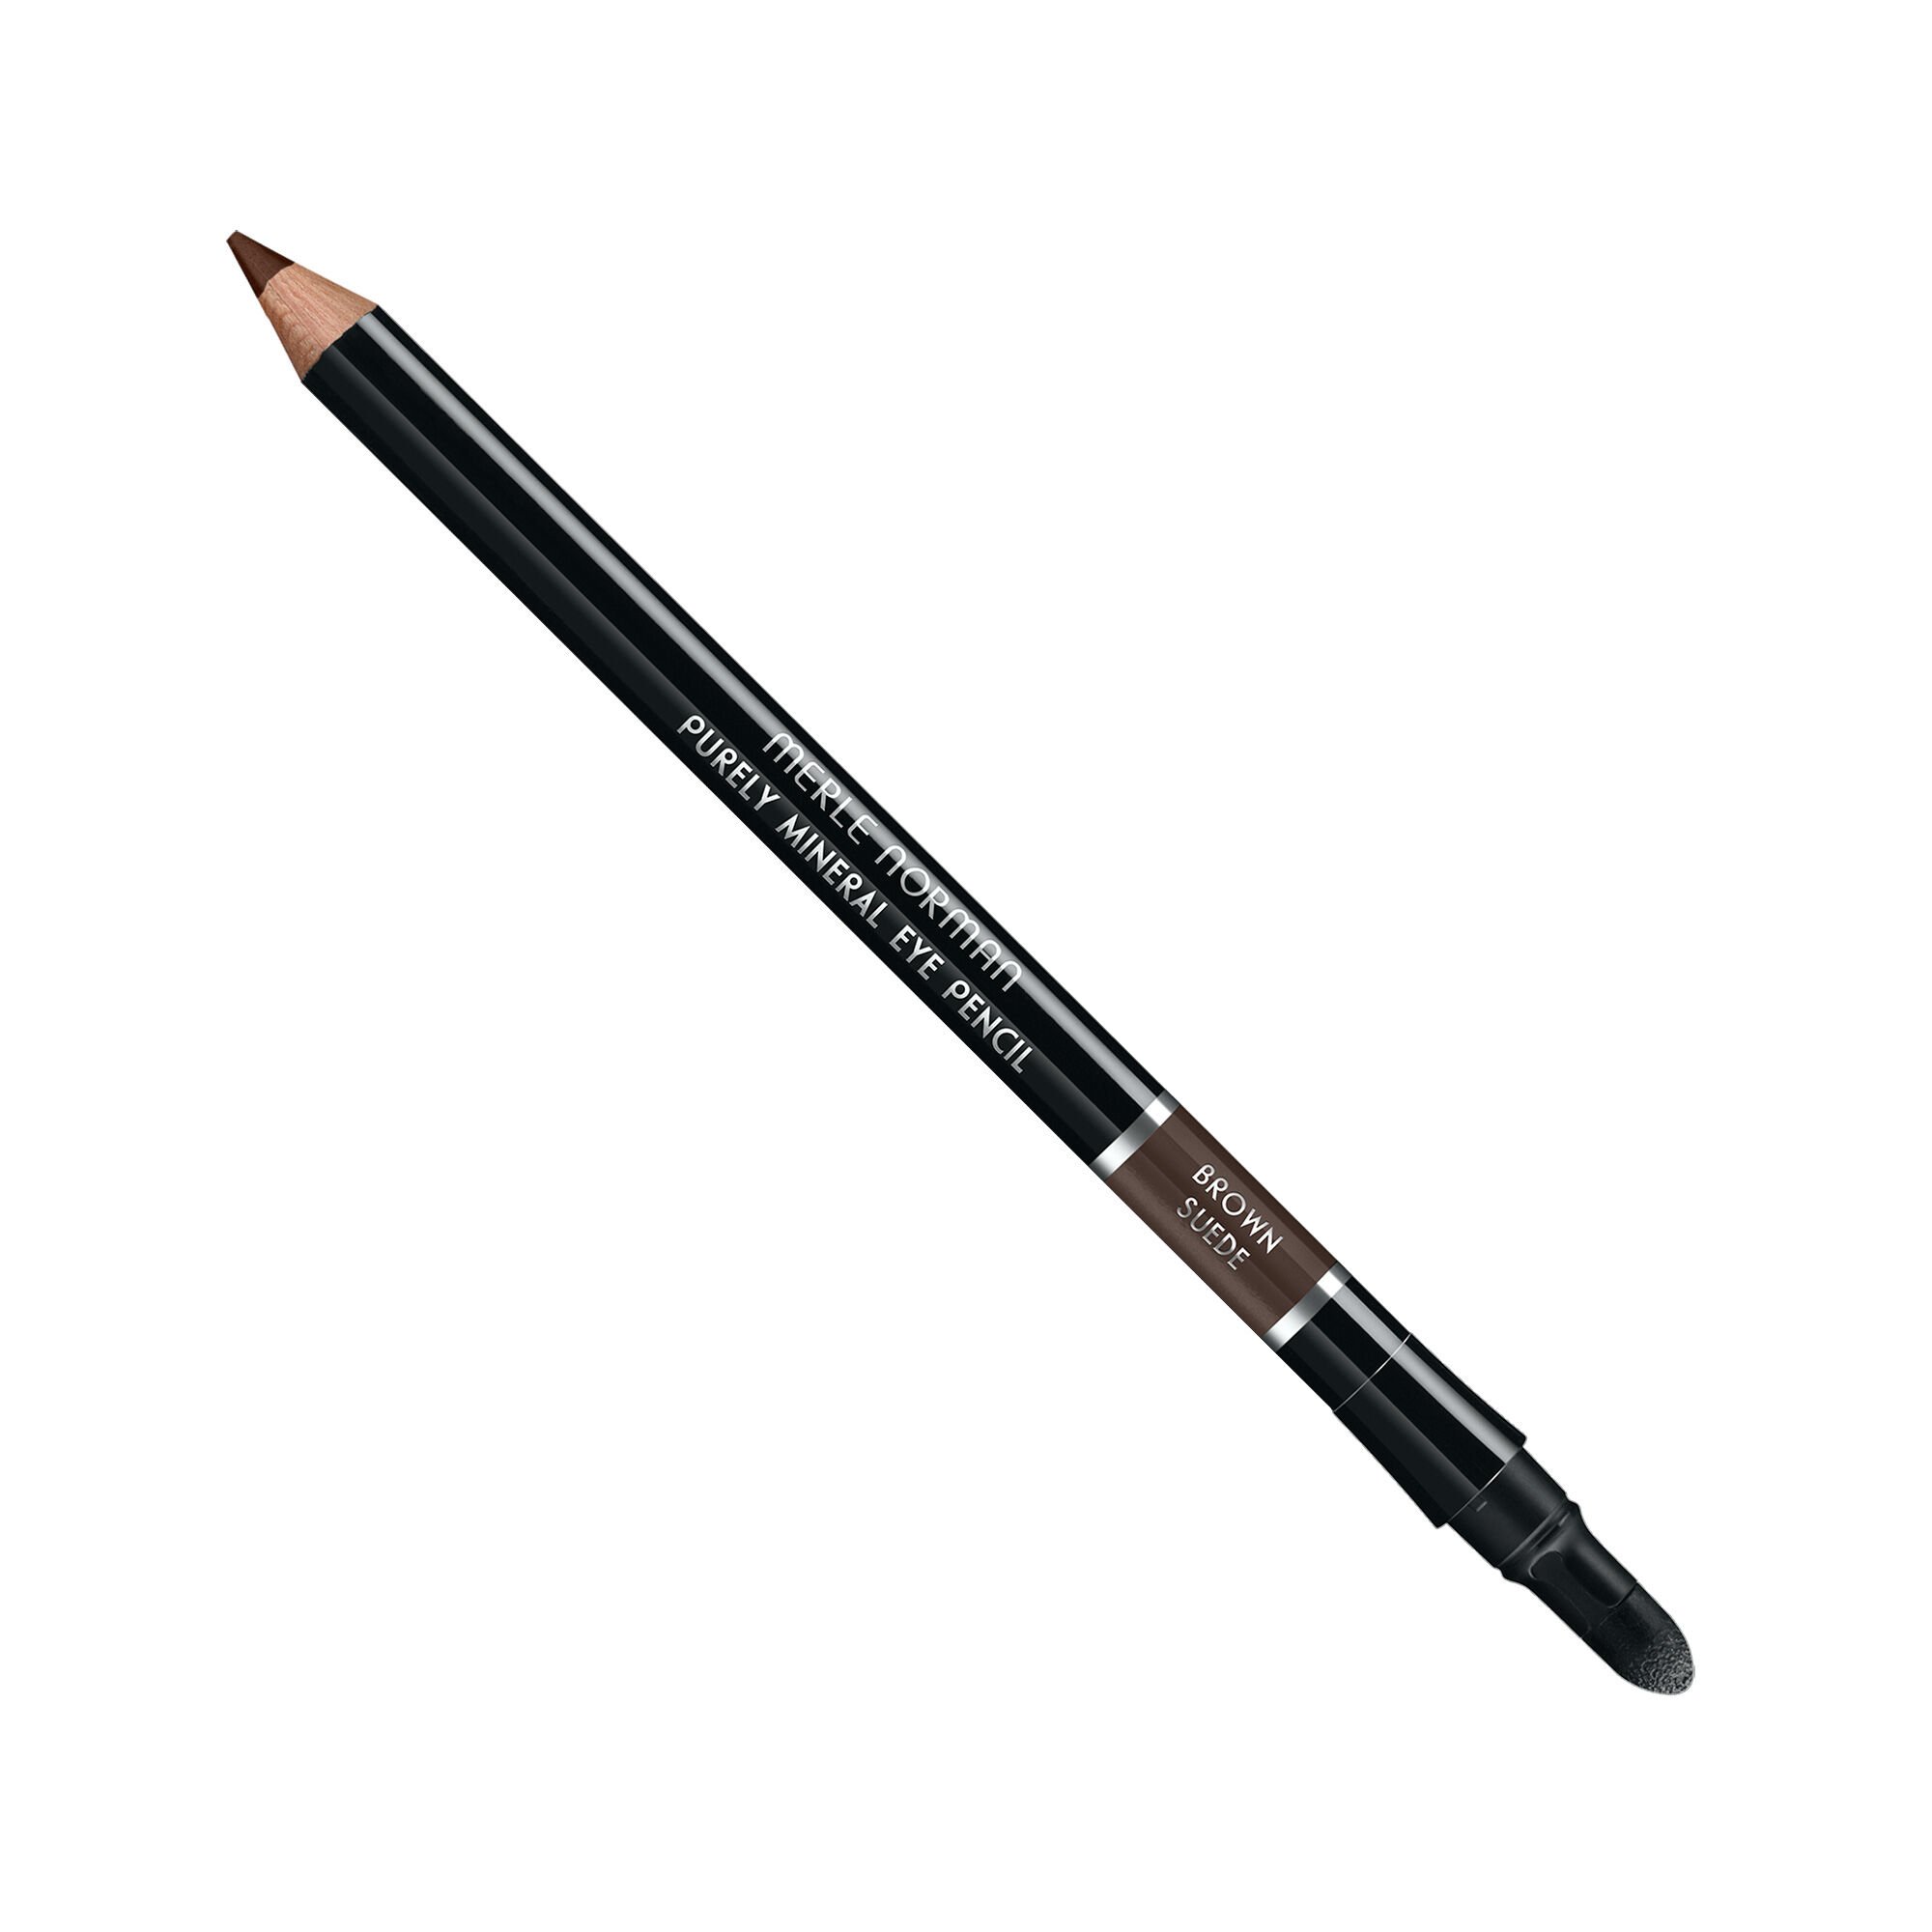 Purely Mineral Eye Pencil